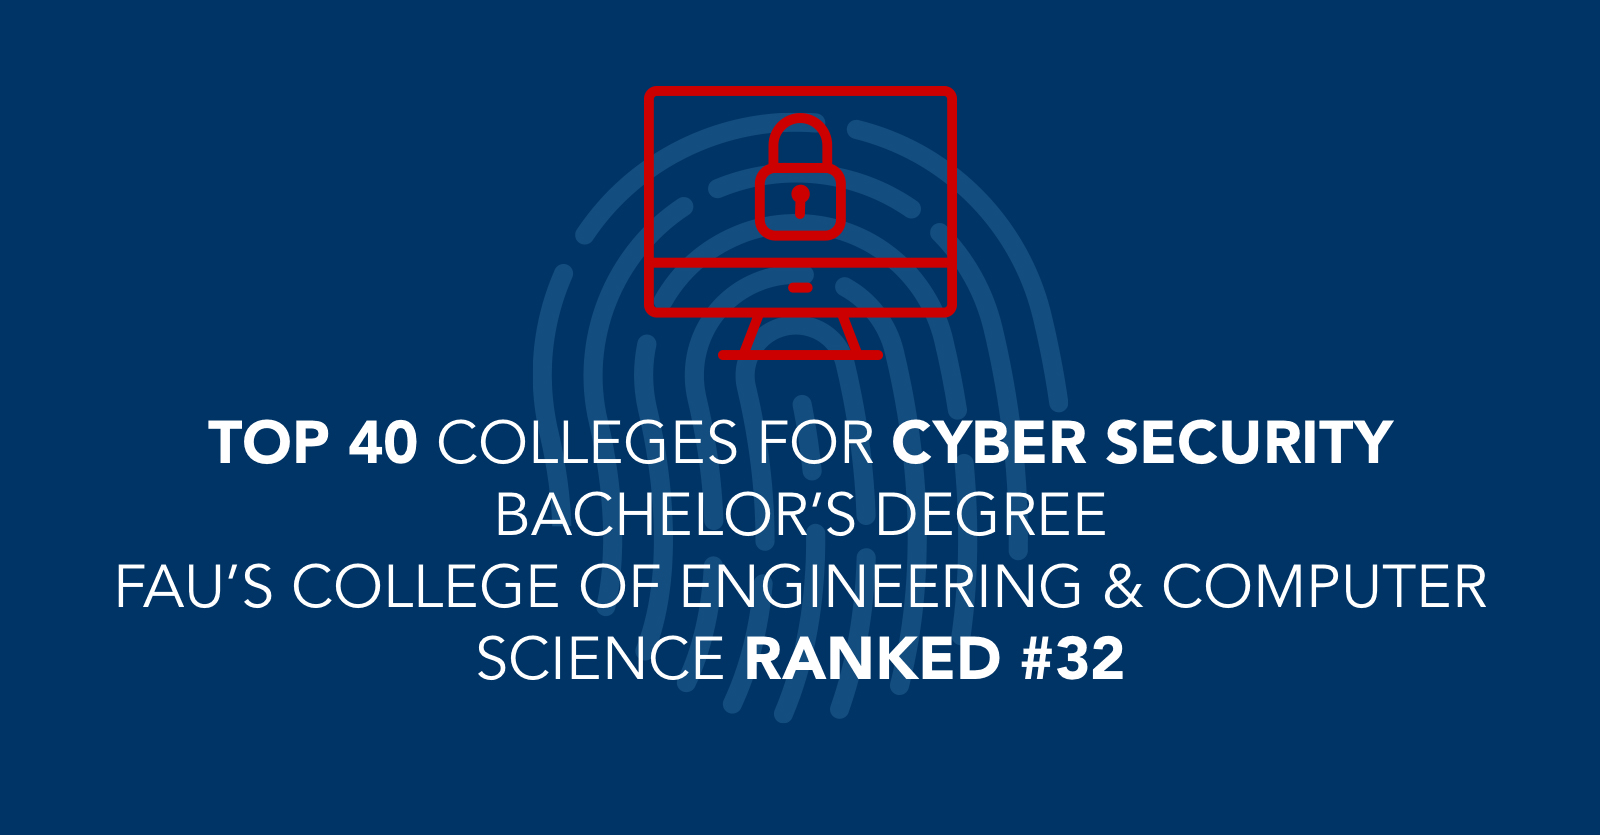 Top 40 Colleges for Cyber Security